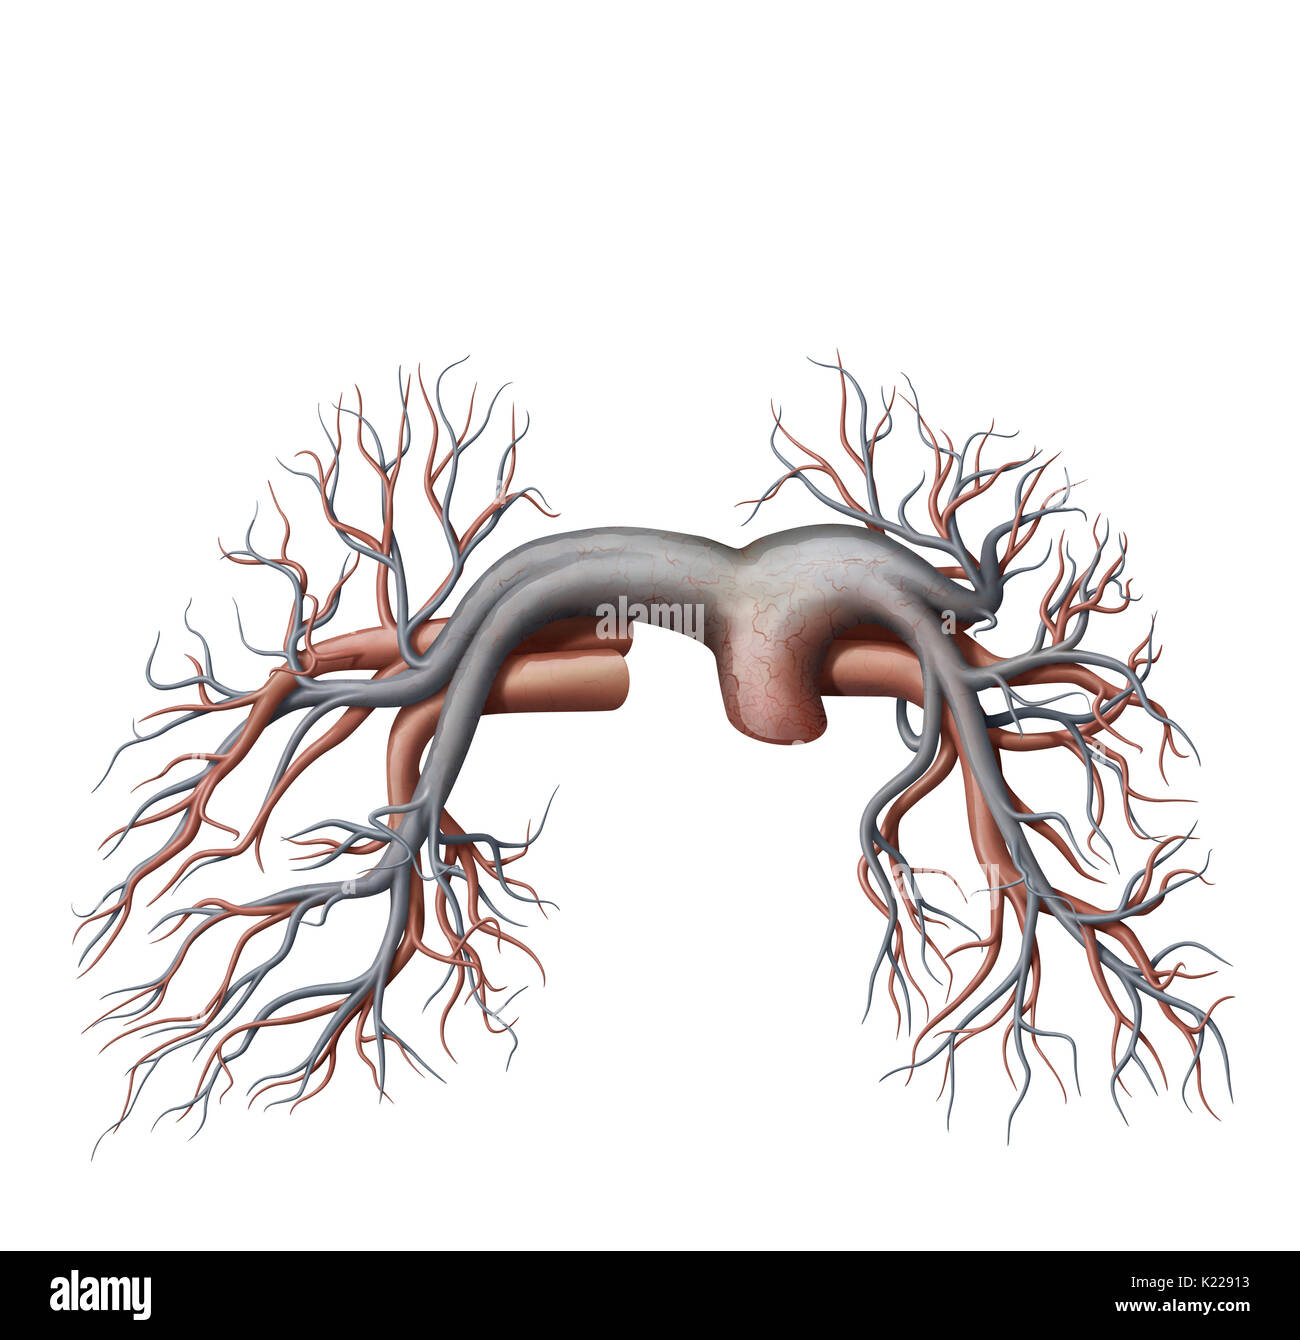 This image shows the pulmonary veins and arteries. Stock Photo